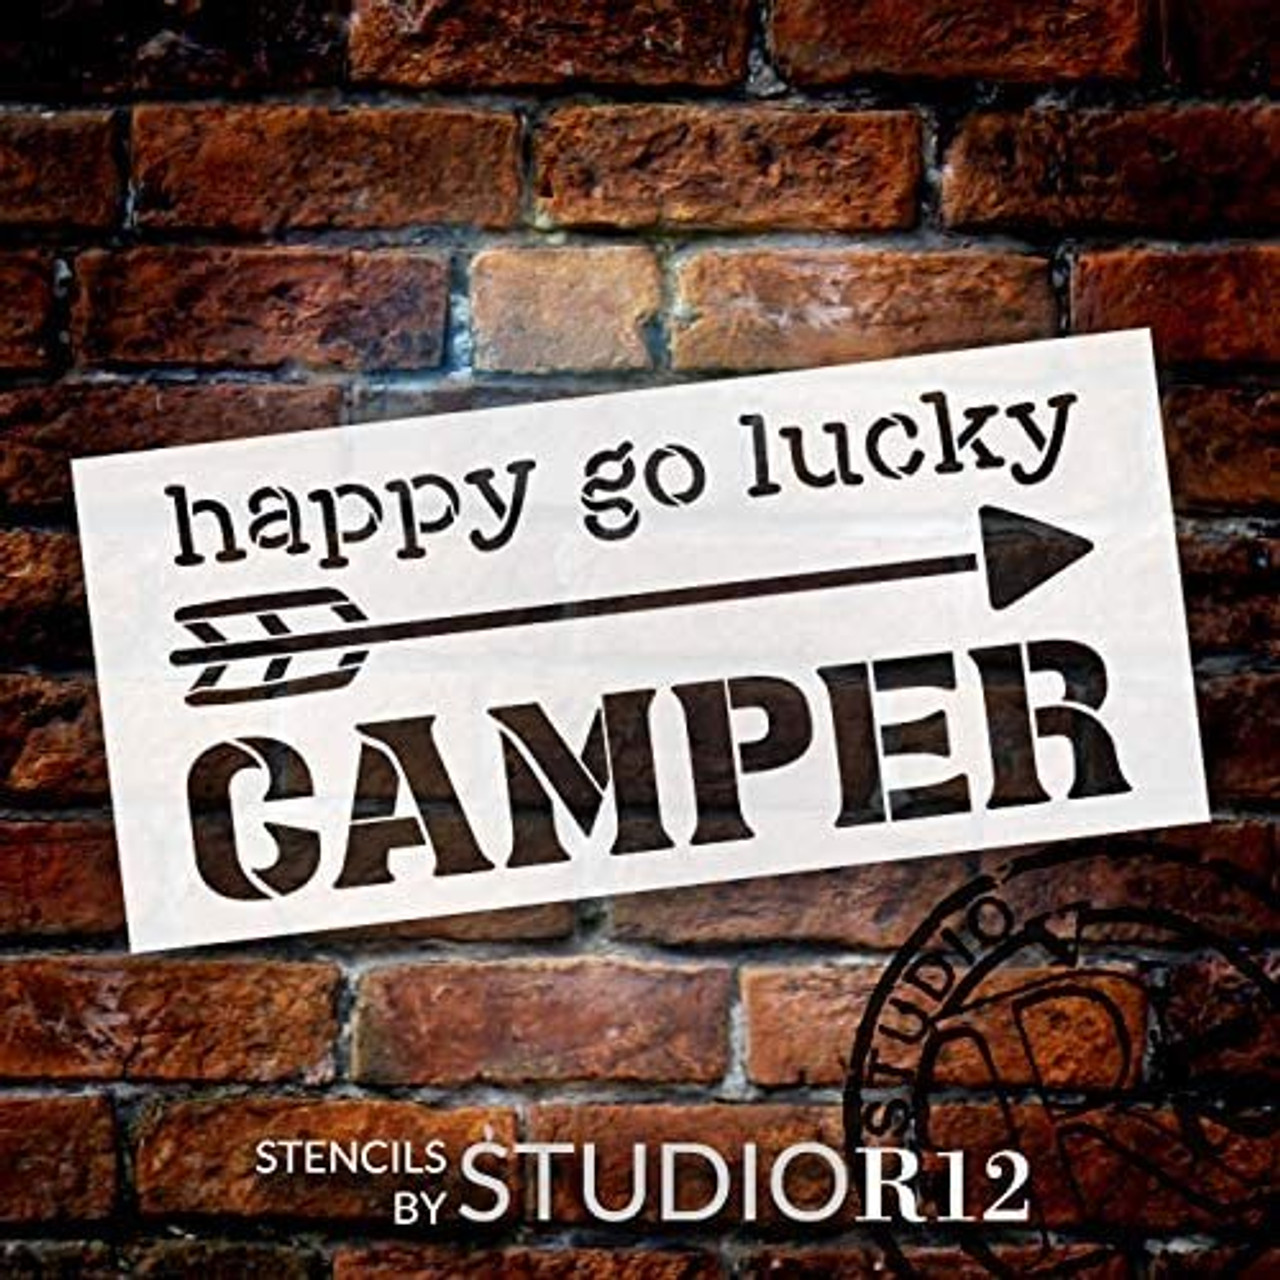 Happy Go Lucky Camper Stencil by StudioR12 | DIY Arrow Home Decor | Craft & Paint Wood Sign | Reusable Mylar Template | Gift - Adventure - Children - Family | Select Size